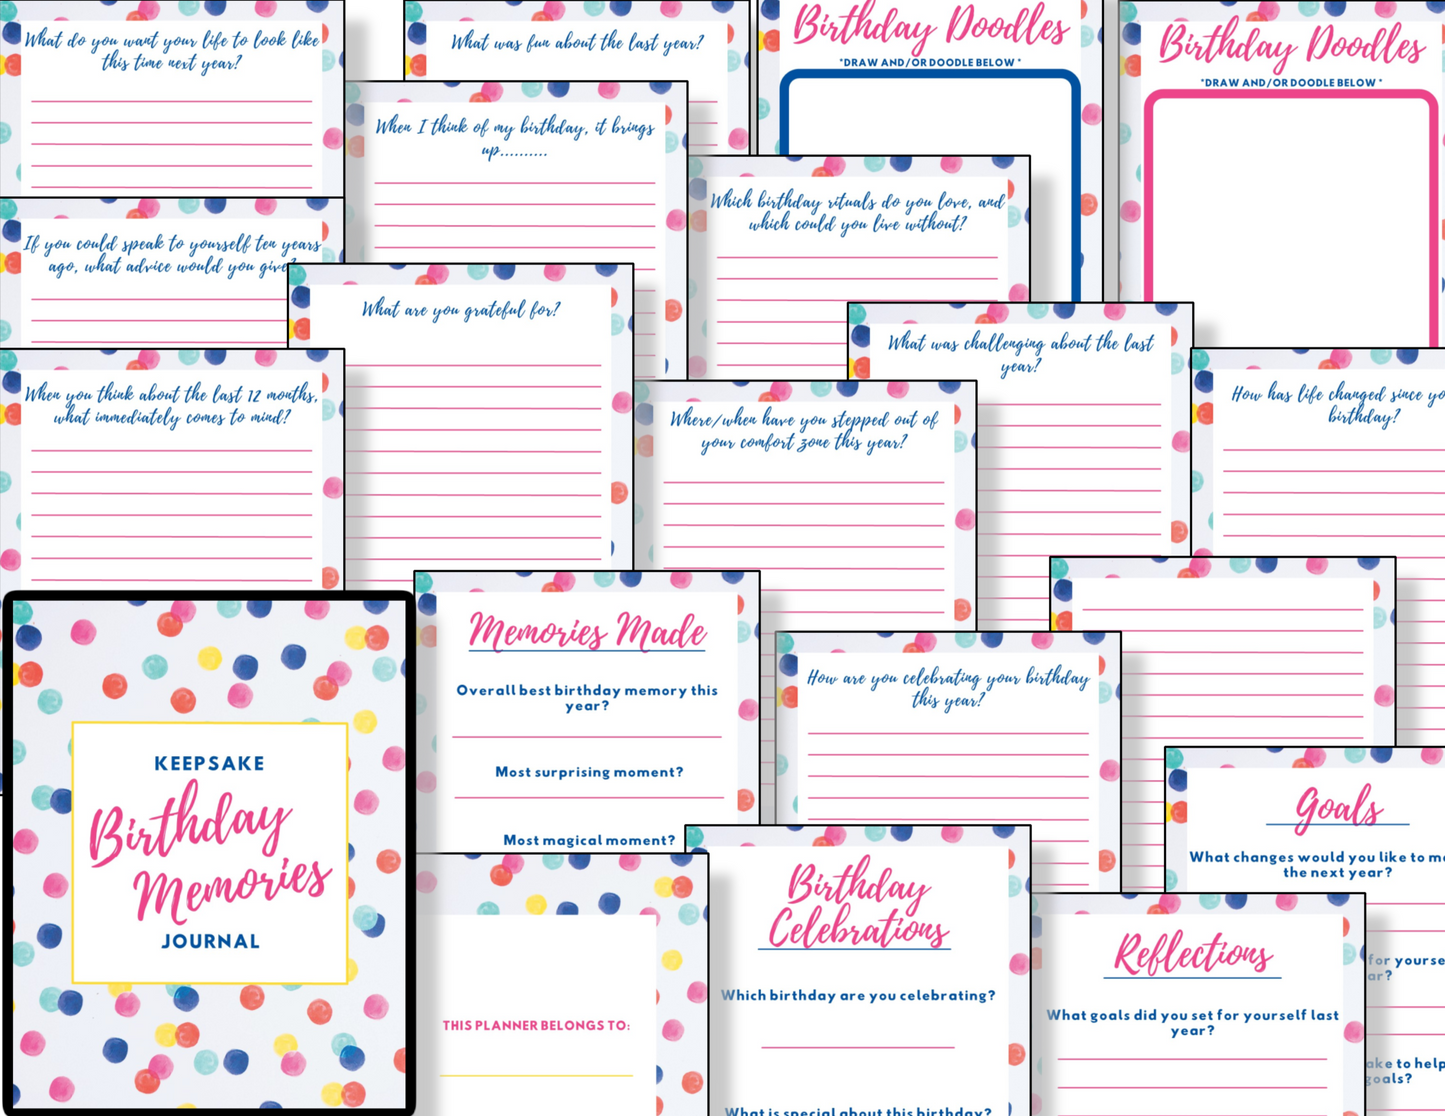 A set of Birthday Memories Keepsake Journals with colorful polka dots from the Organized 31 Shop.